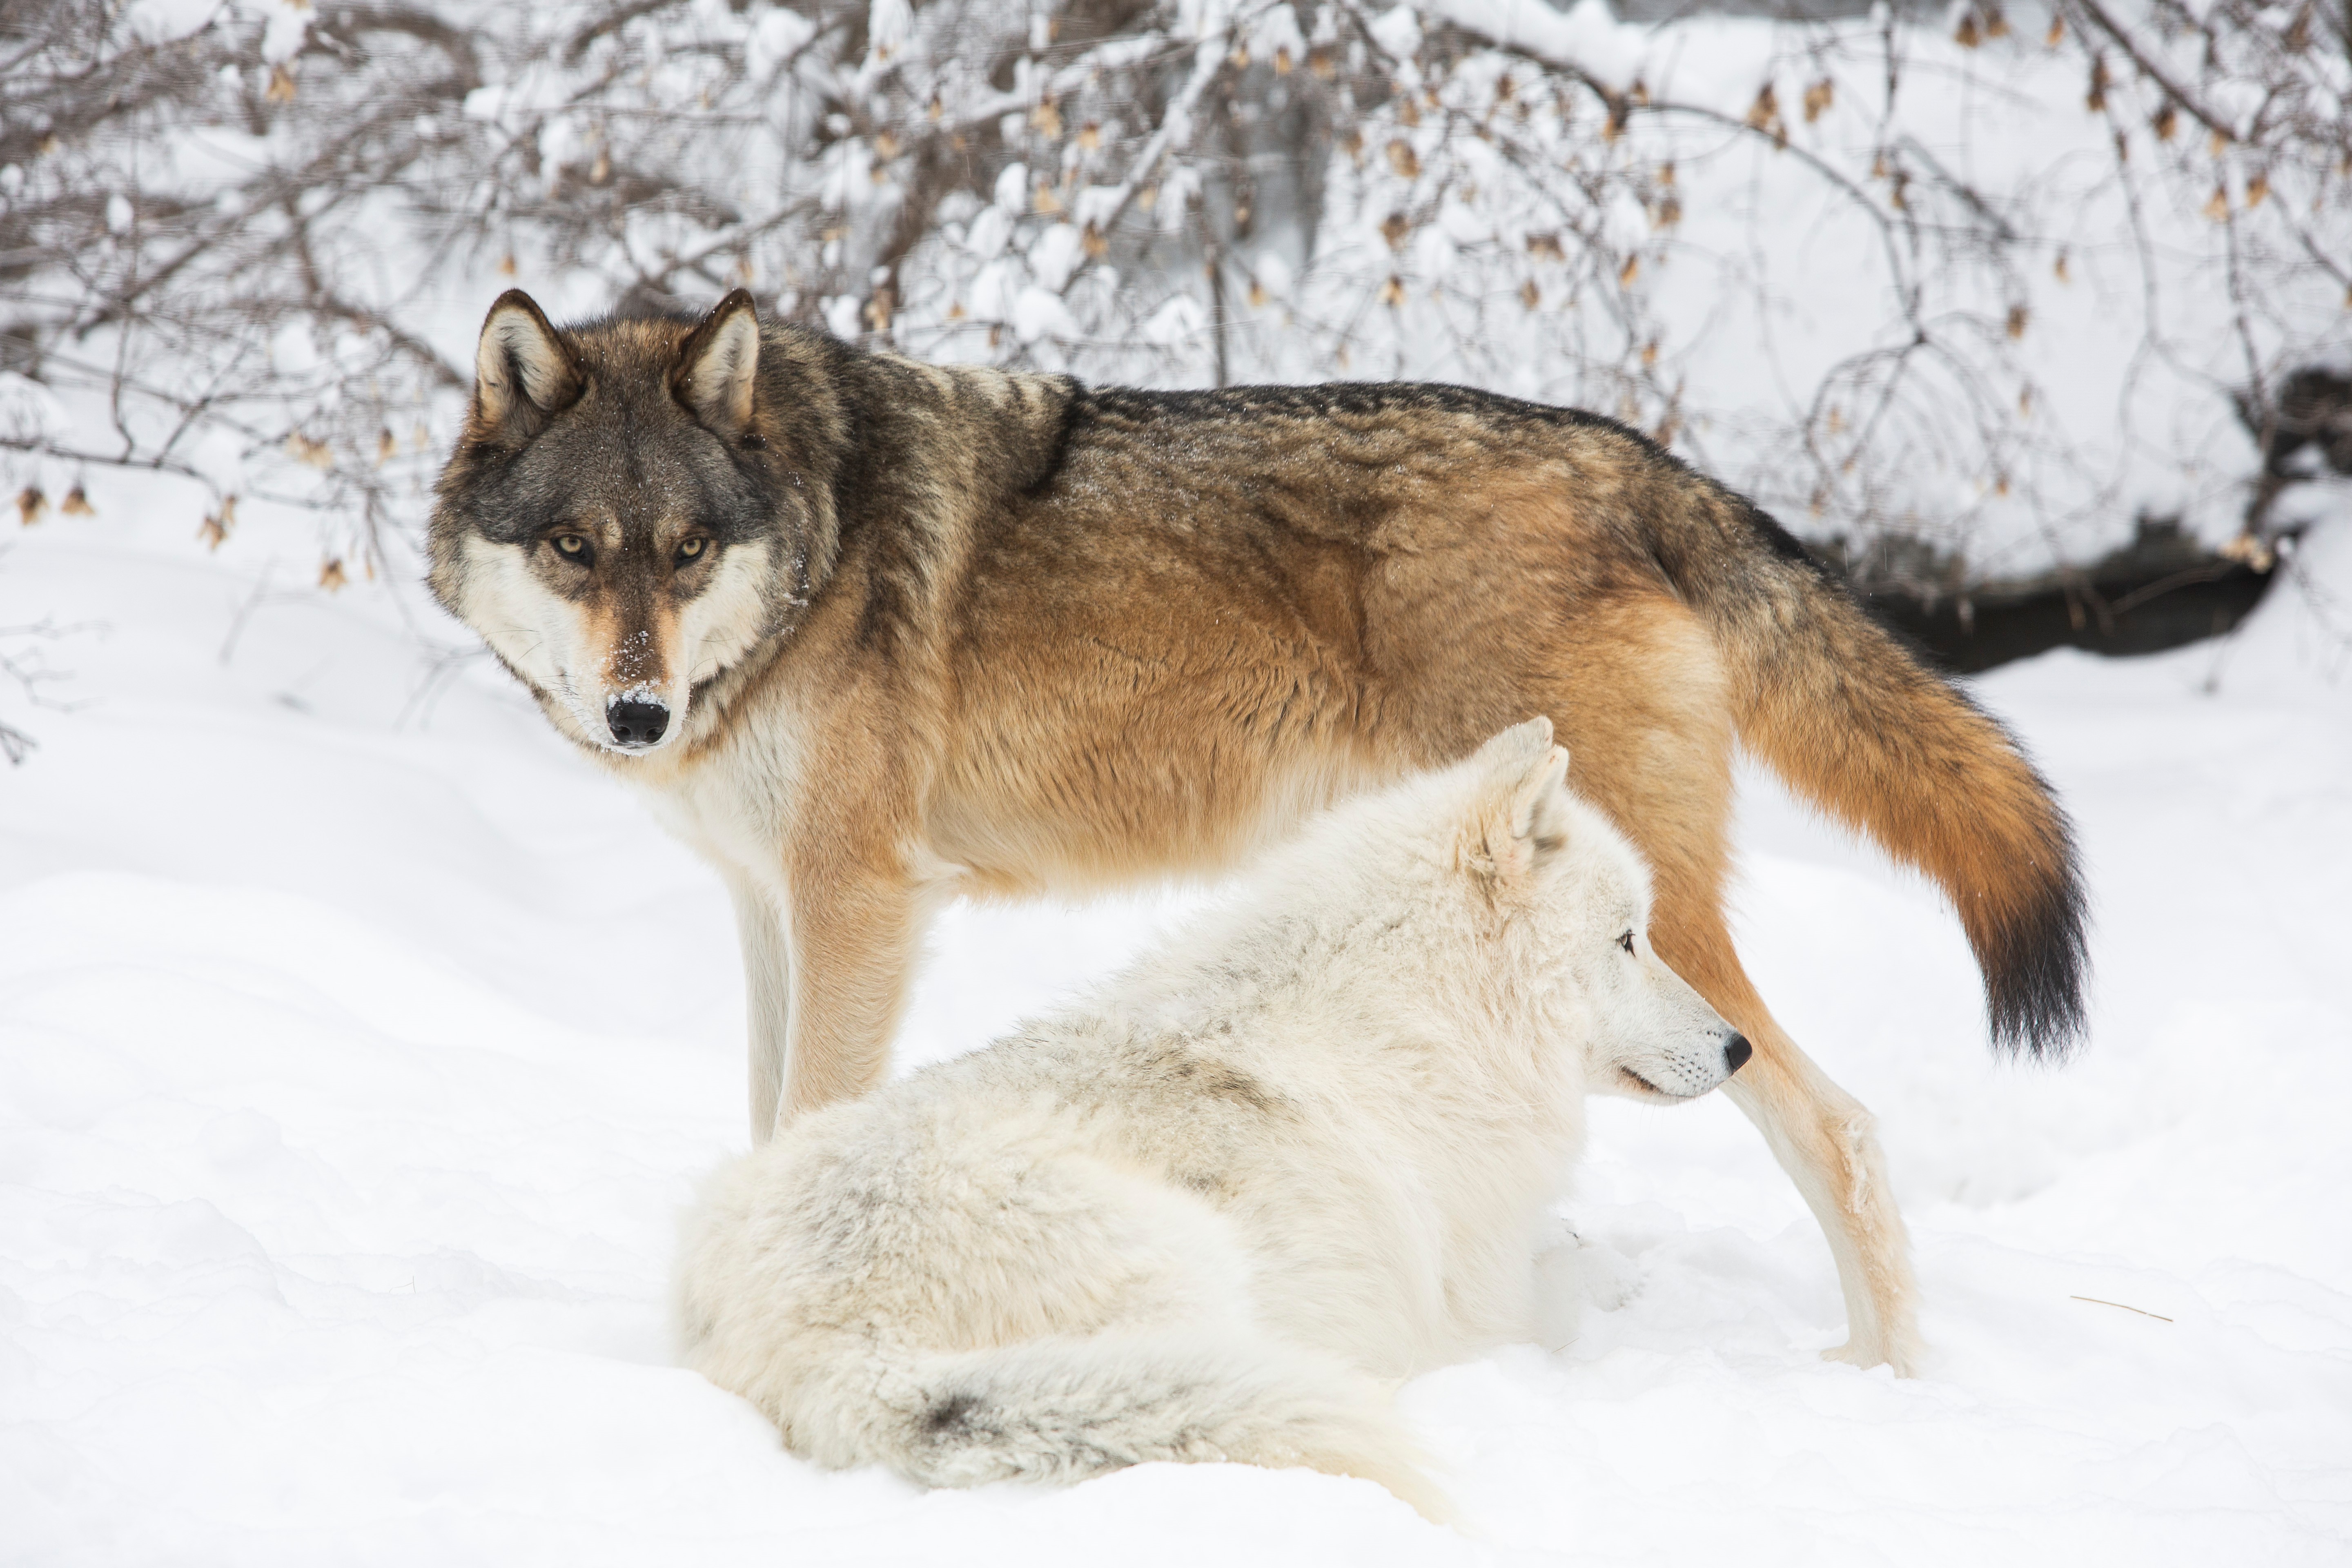 Join the Whorling Spinsters to benefit the International Wolf Center